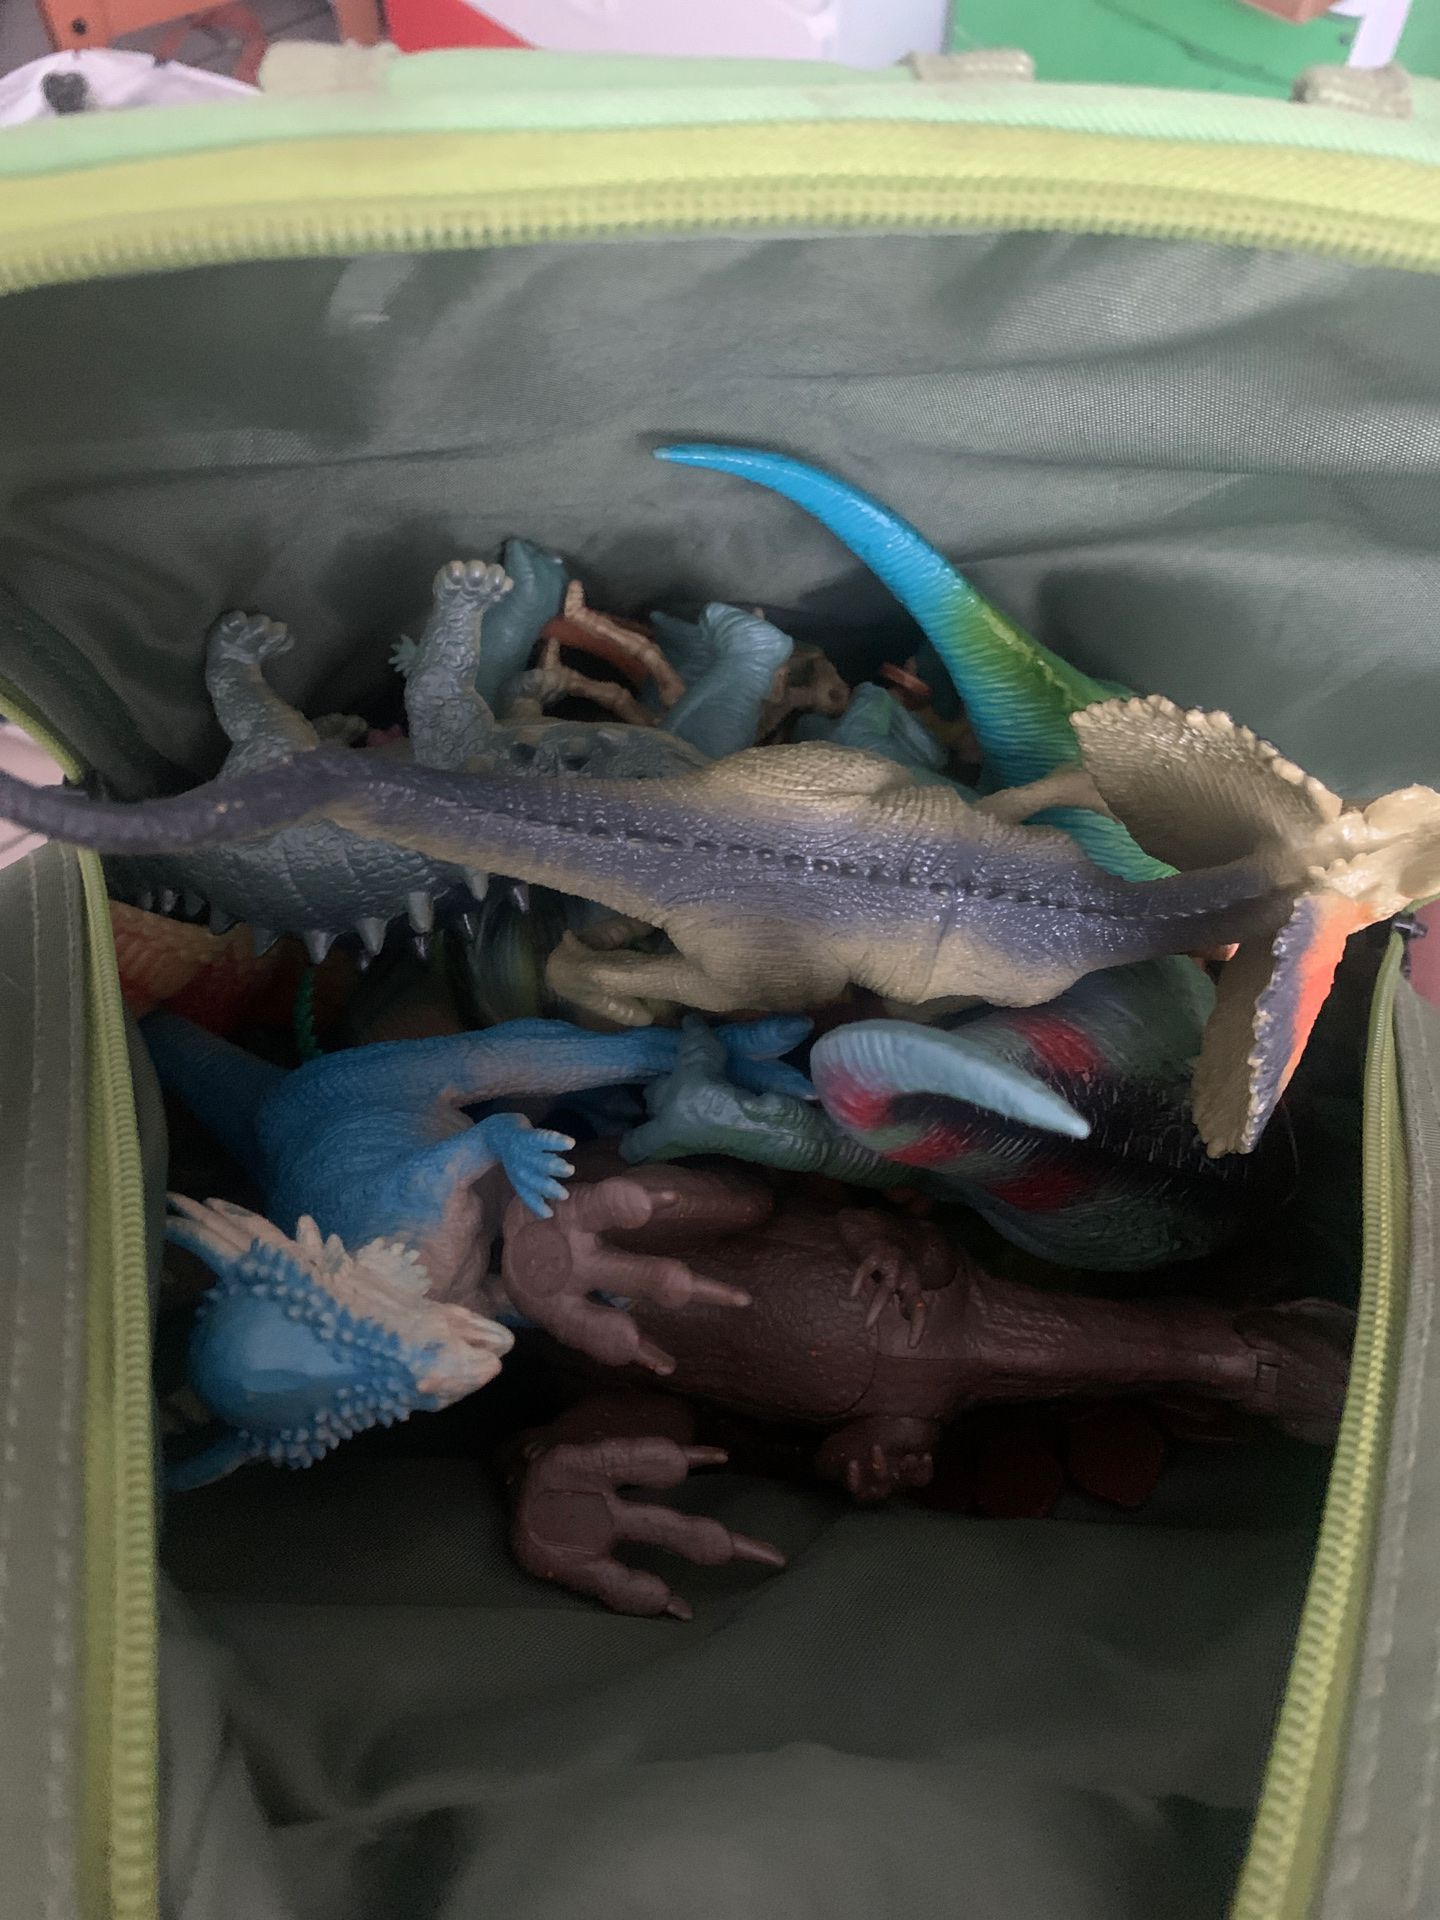 Toy dinosaur backpack